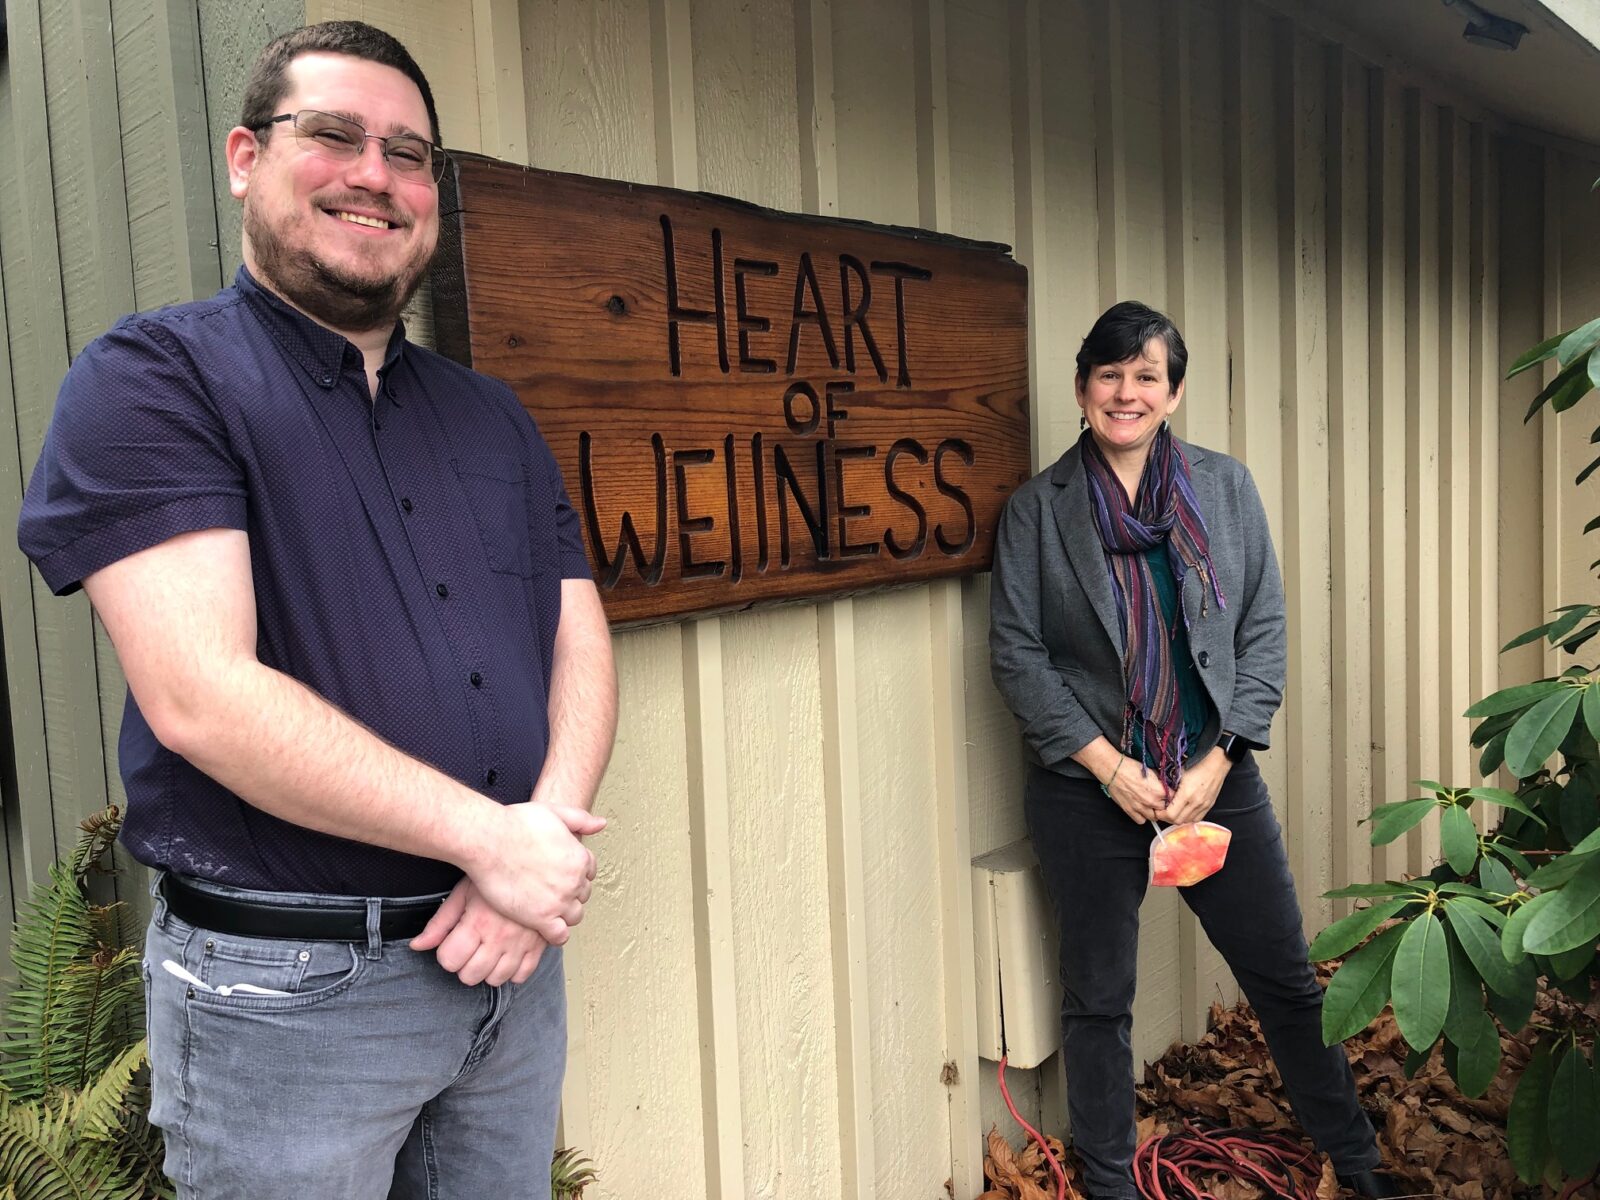 Ben Edwards, Heart of Wellness clinic manager, and Laura Woodworth, registered dietician nutritionist, invite you to check out their Tumwater holistic health care clinic. Photo credit: Nancy Krier